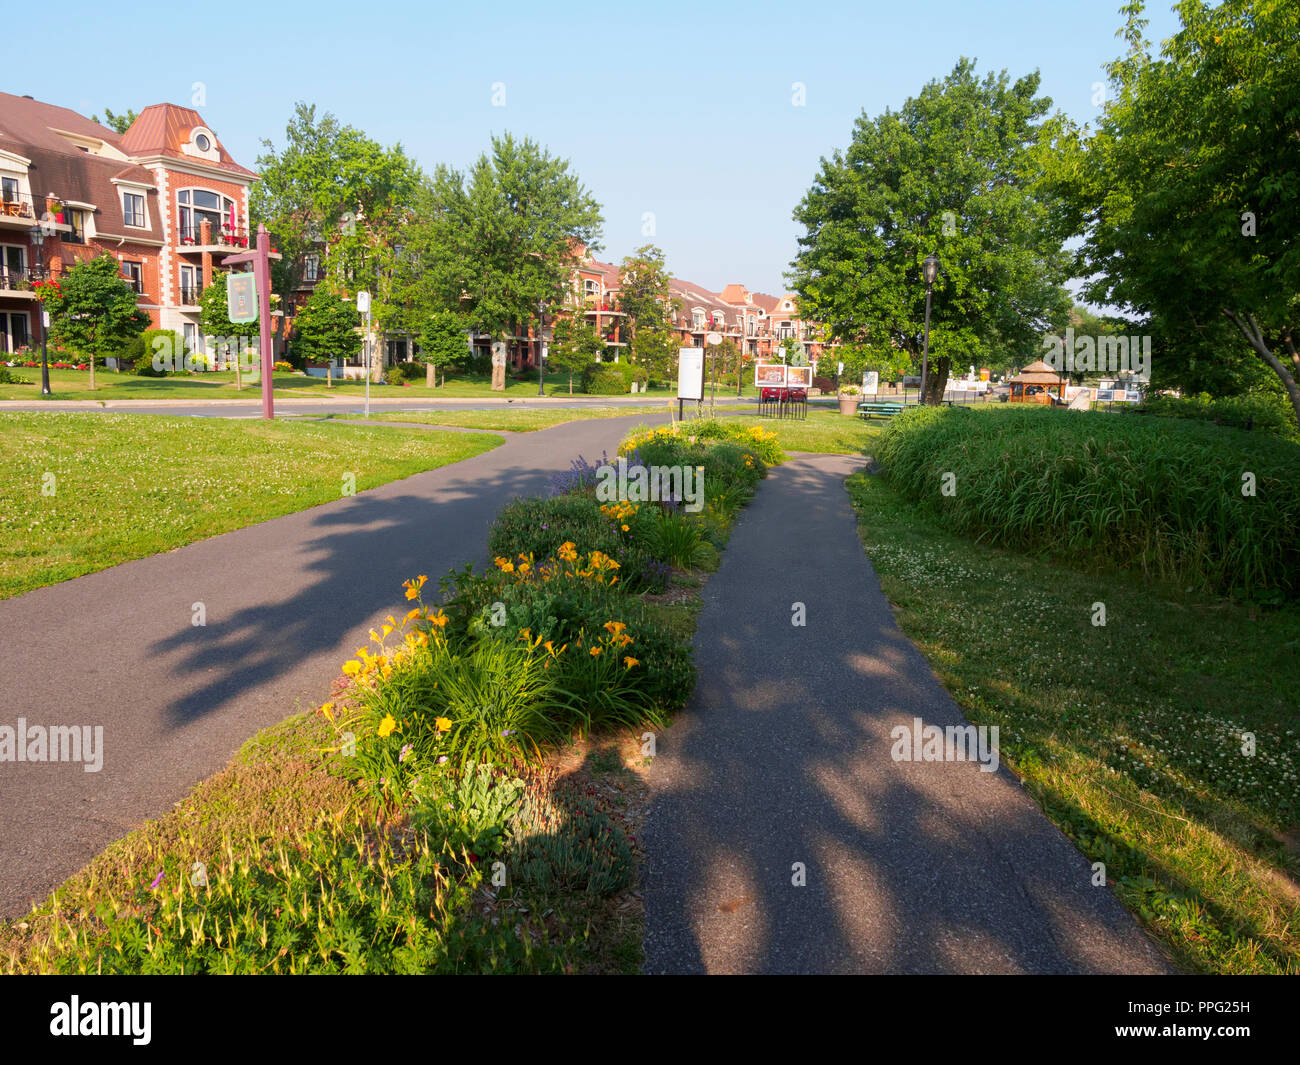 Municipal park in the village of Chambly, Quebec Stock Photo